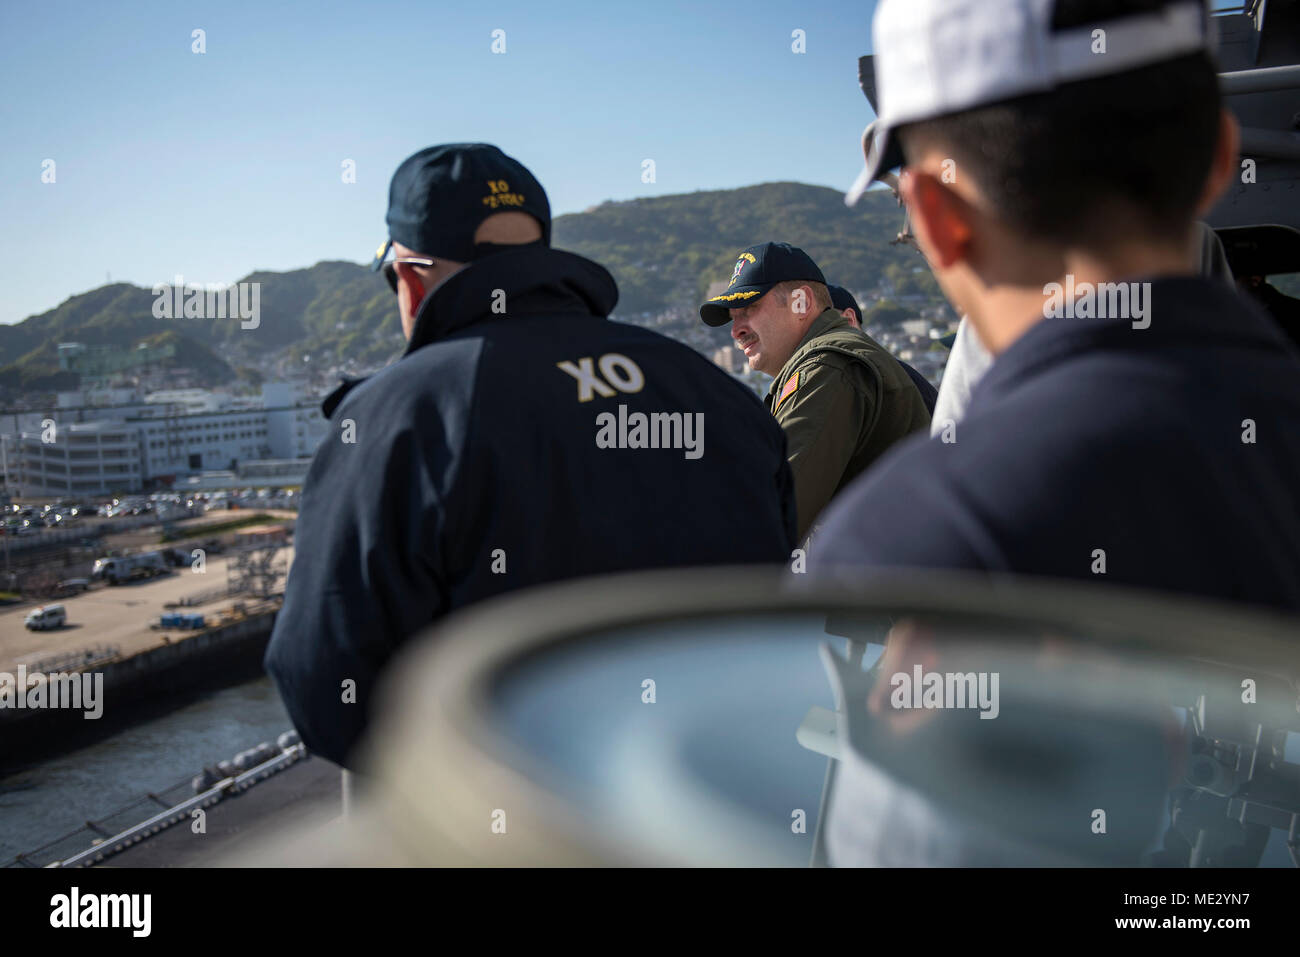 180418-N-WF272-226 SASEBO, Japan (April 18, 2018) Capt. Larry McCullen, center, commanding officer of the amphibious assault ship USS Bonhomme Richard (LHD 6), Capt. Richard Lebron, executive officer, and bridge officers observe pier operations as the ship departs Sasebo, Japan for the last time. Bonhomme Richard has been the flagship of the Amphibious Force 7th Fleet since April 2012 and will now transit to its new homeport in San Diego for follow-on operations and eventual upgrades to become F-35B Lightning II capable. (U.S. Navy photo by Mass Communication Specialist 2nd Class Diana Quinlan Stock Photo